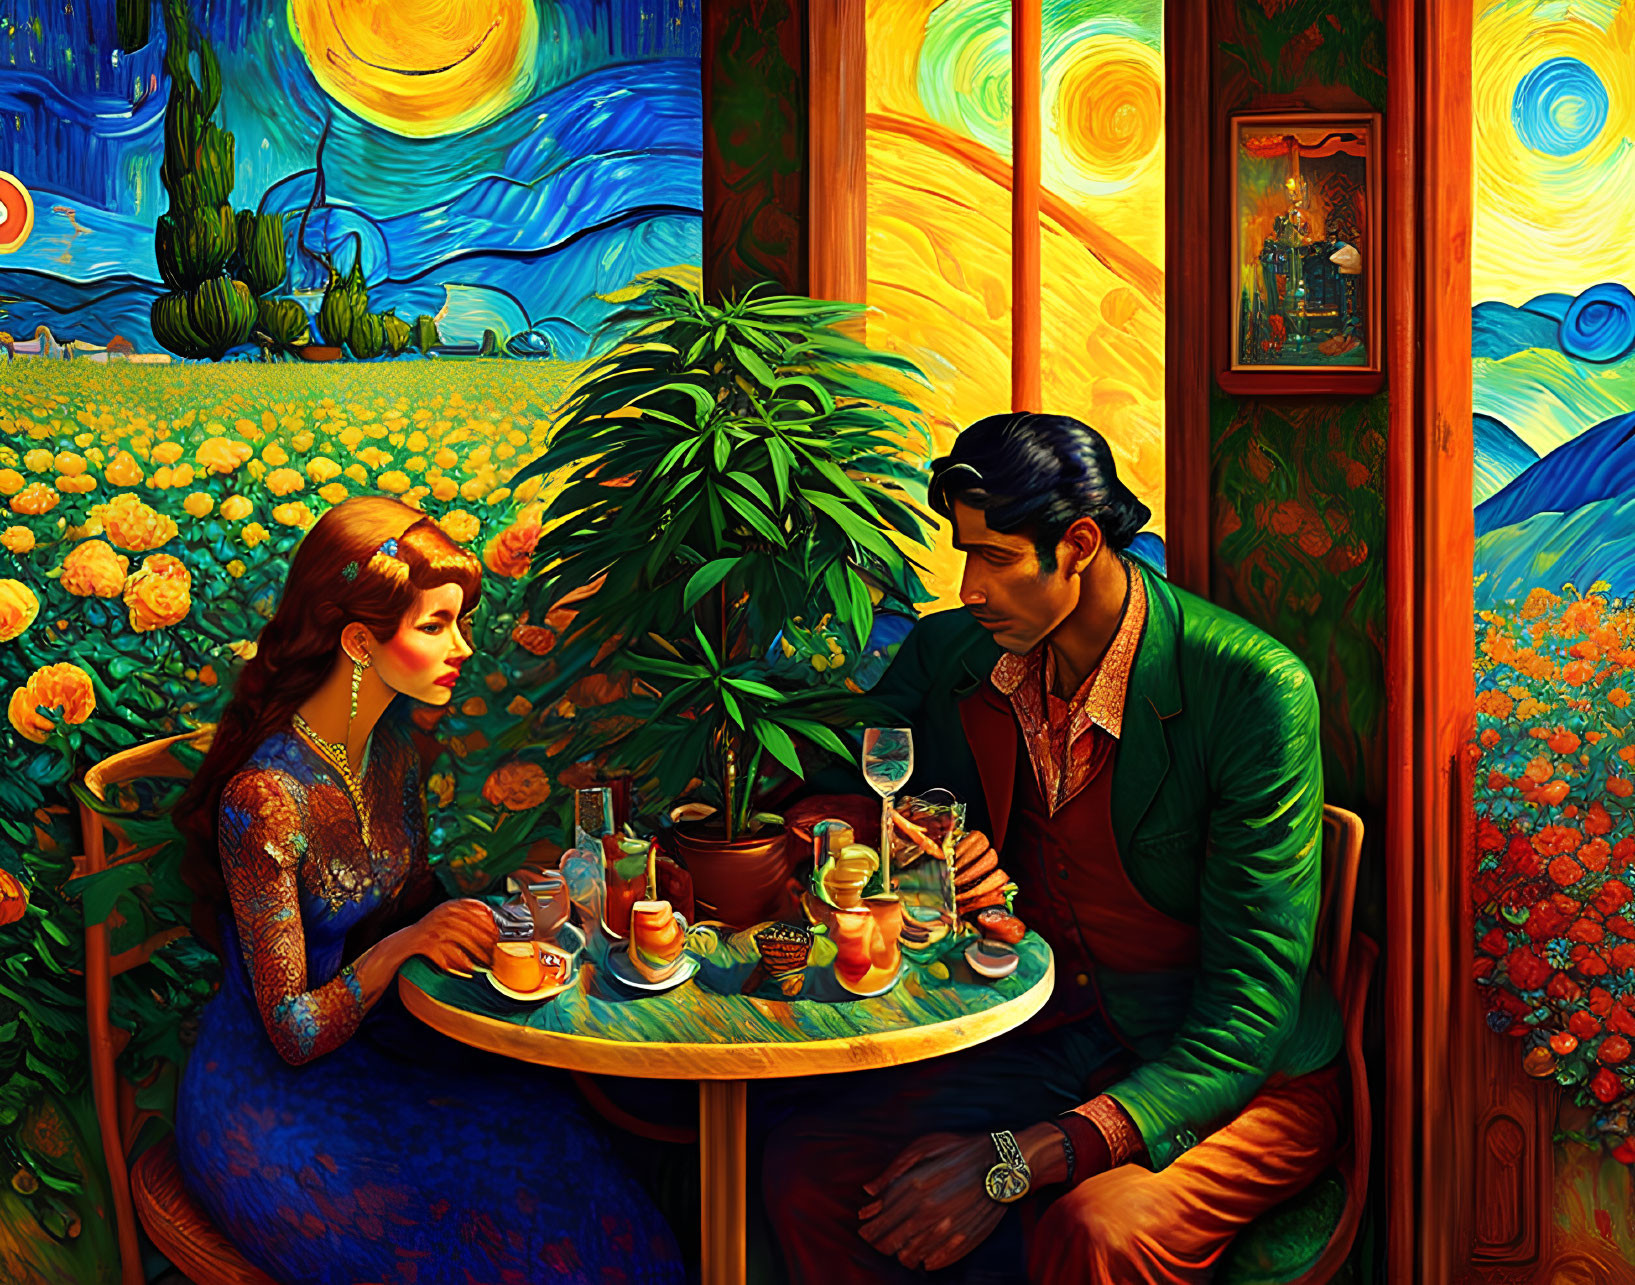 Vibrant Van Gogh-inspired cafe scene with stylized couple and colorful swirls